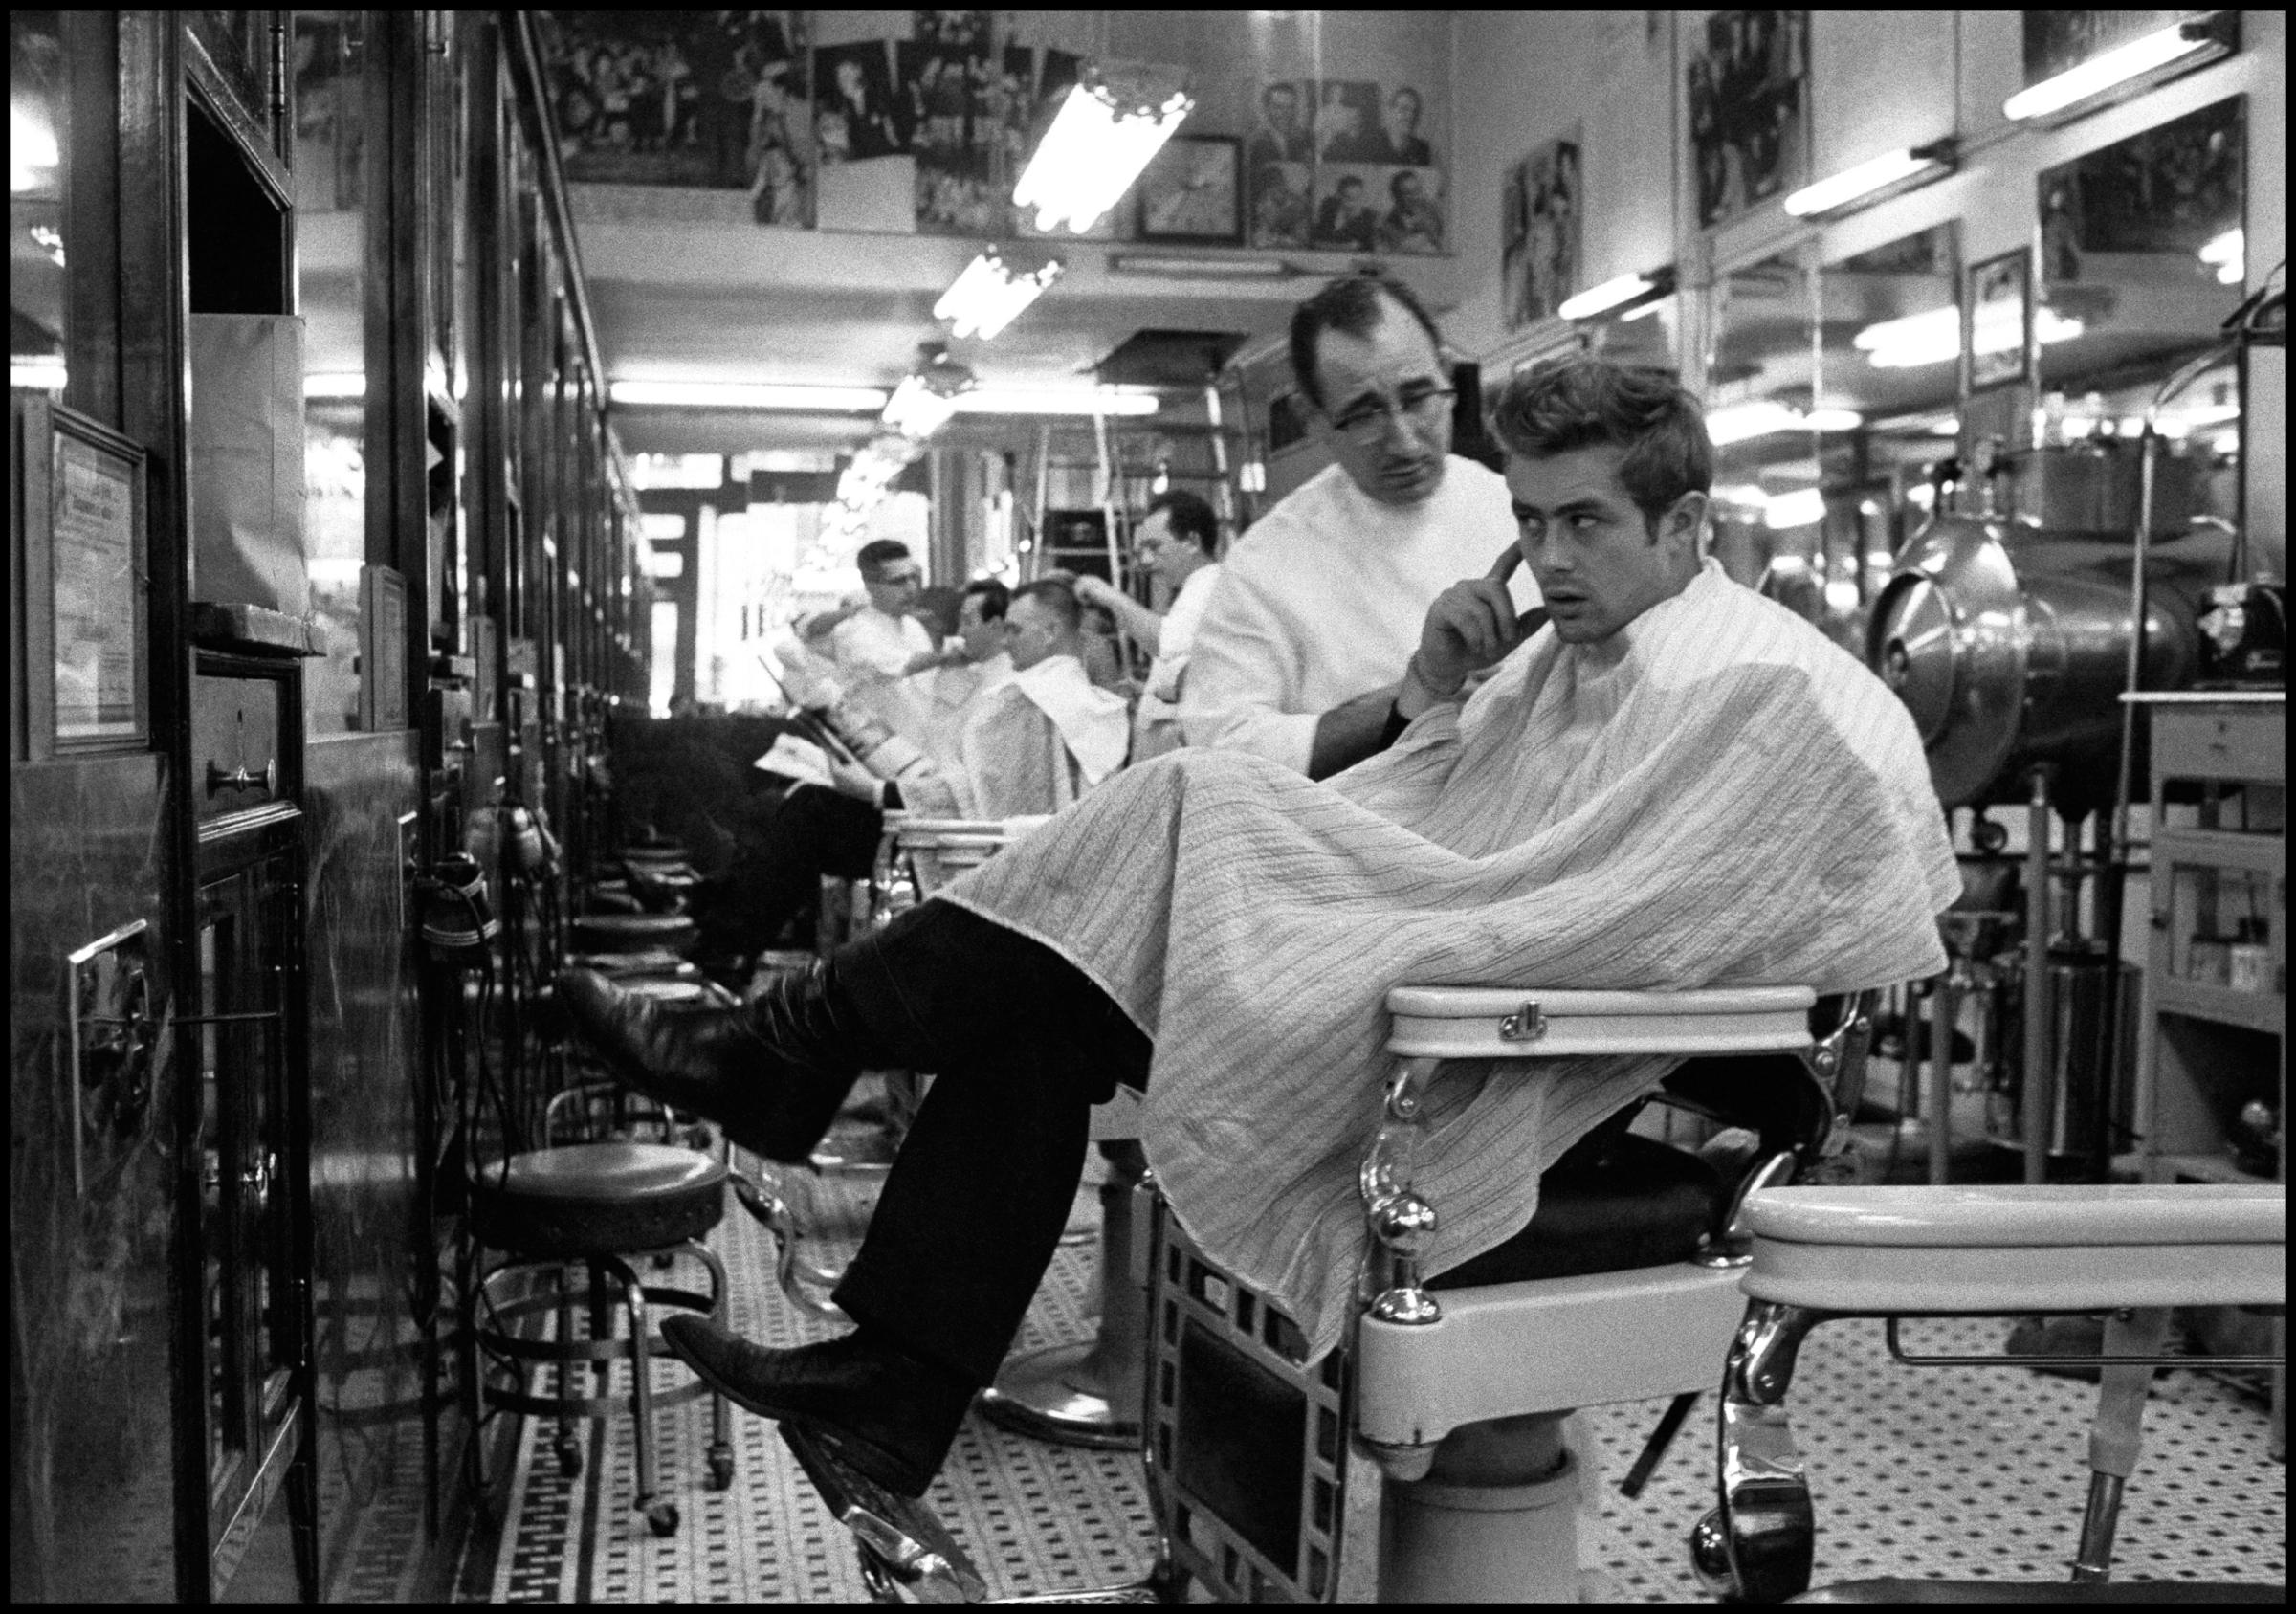 James Dean at a barber shop near Times Square, New York. 1955.